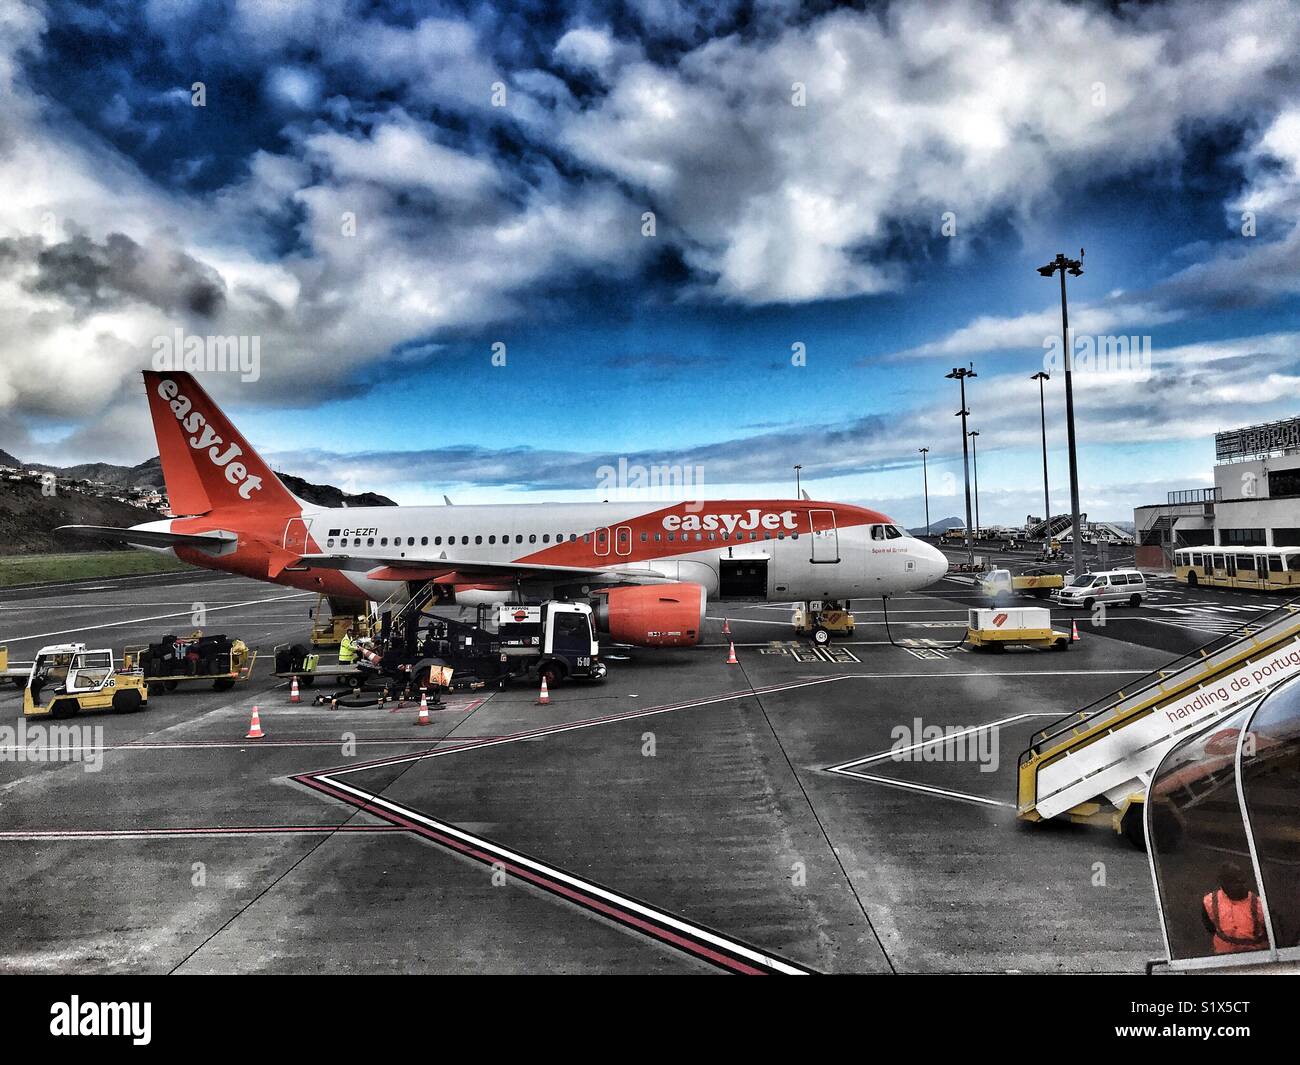 EasyJet aeroplane on the tarmac at Funchal airport on the island of Madeira, Portugal Stock Photo